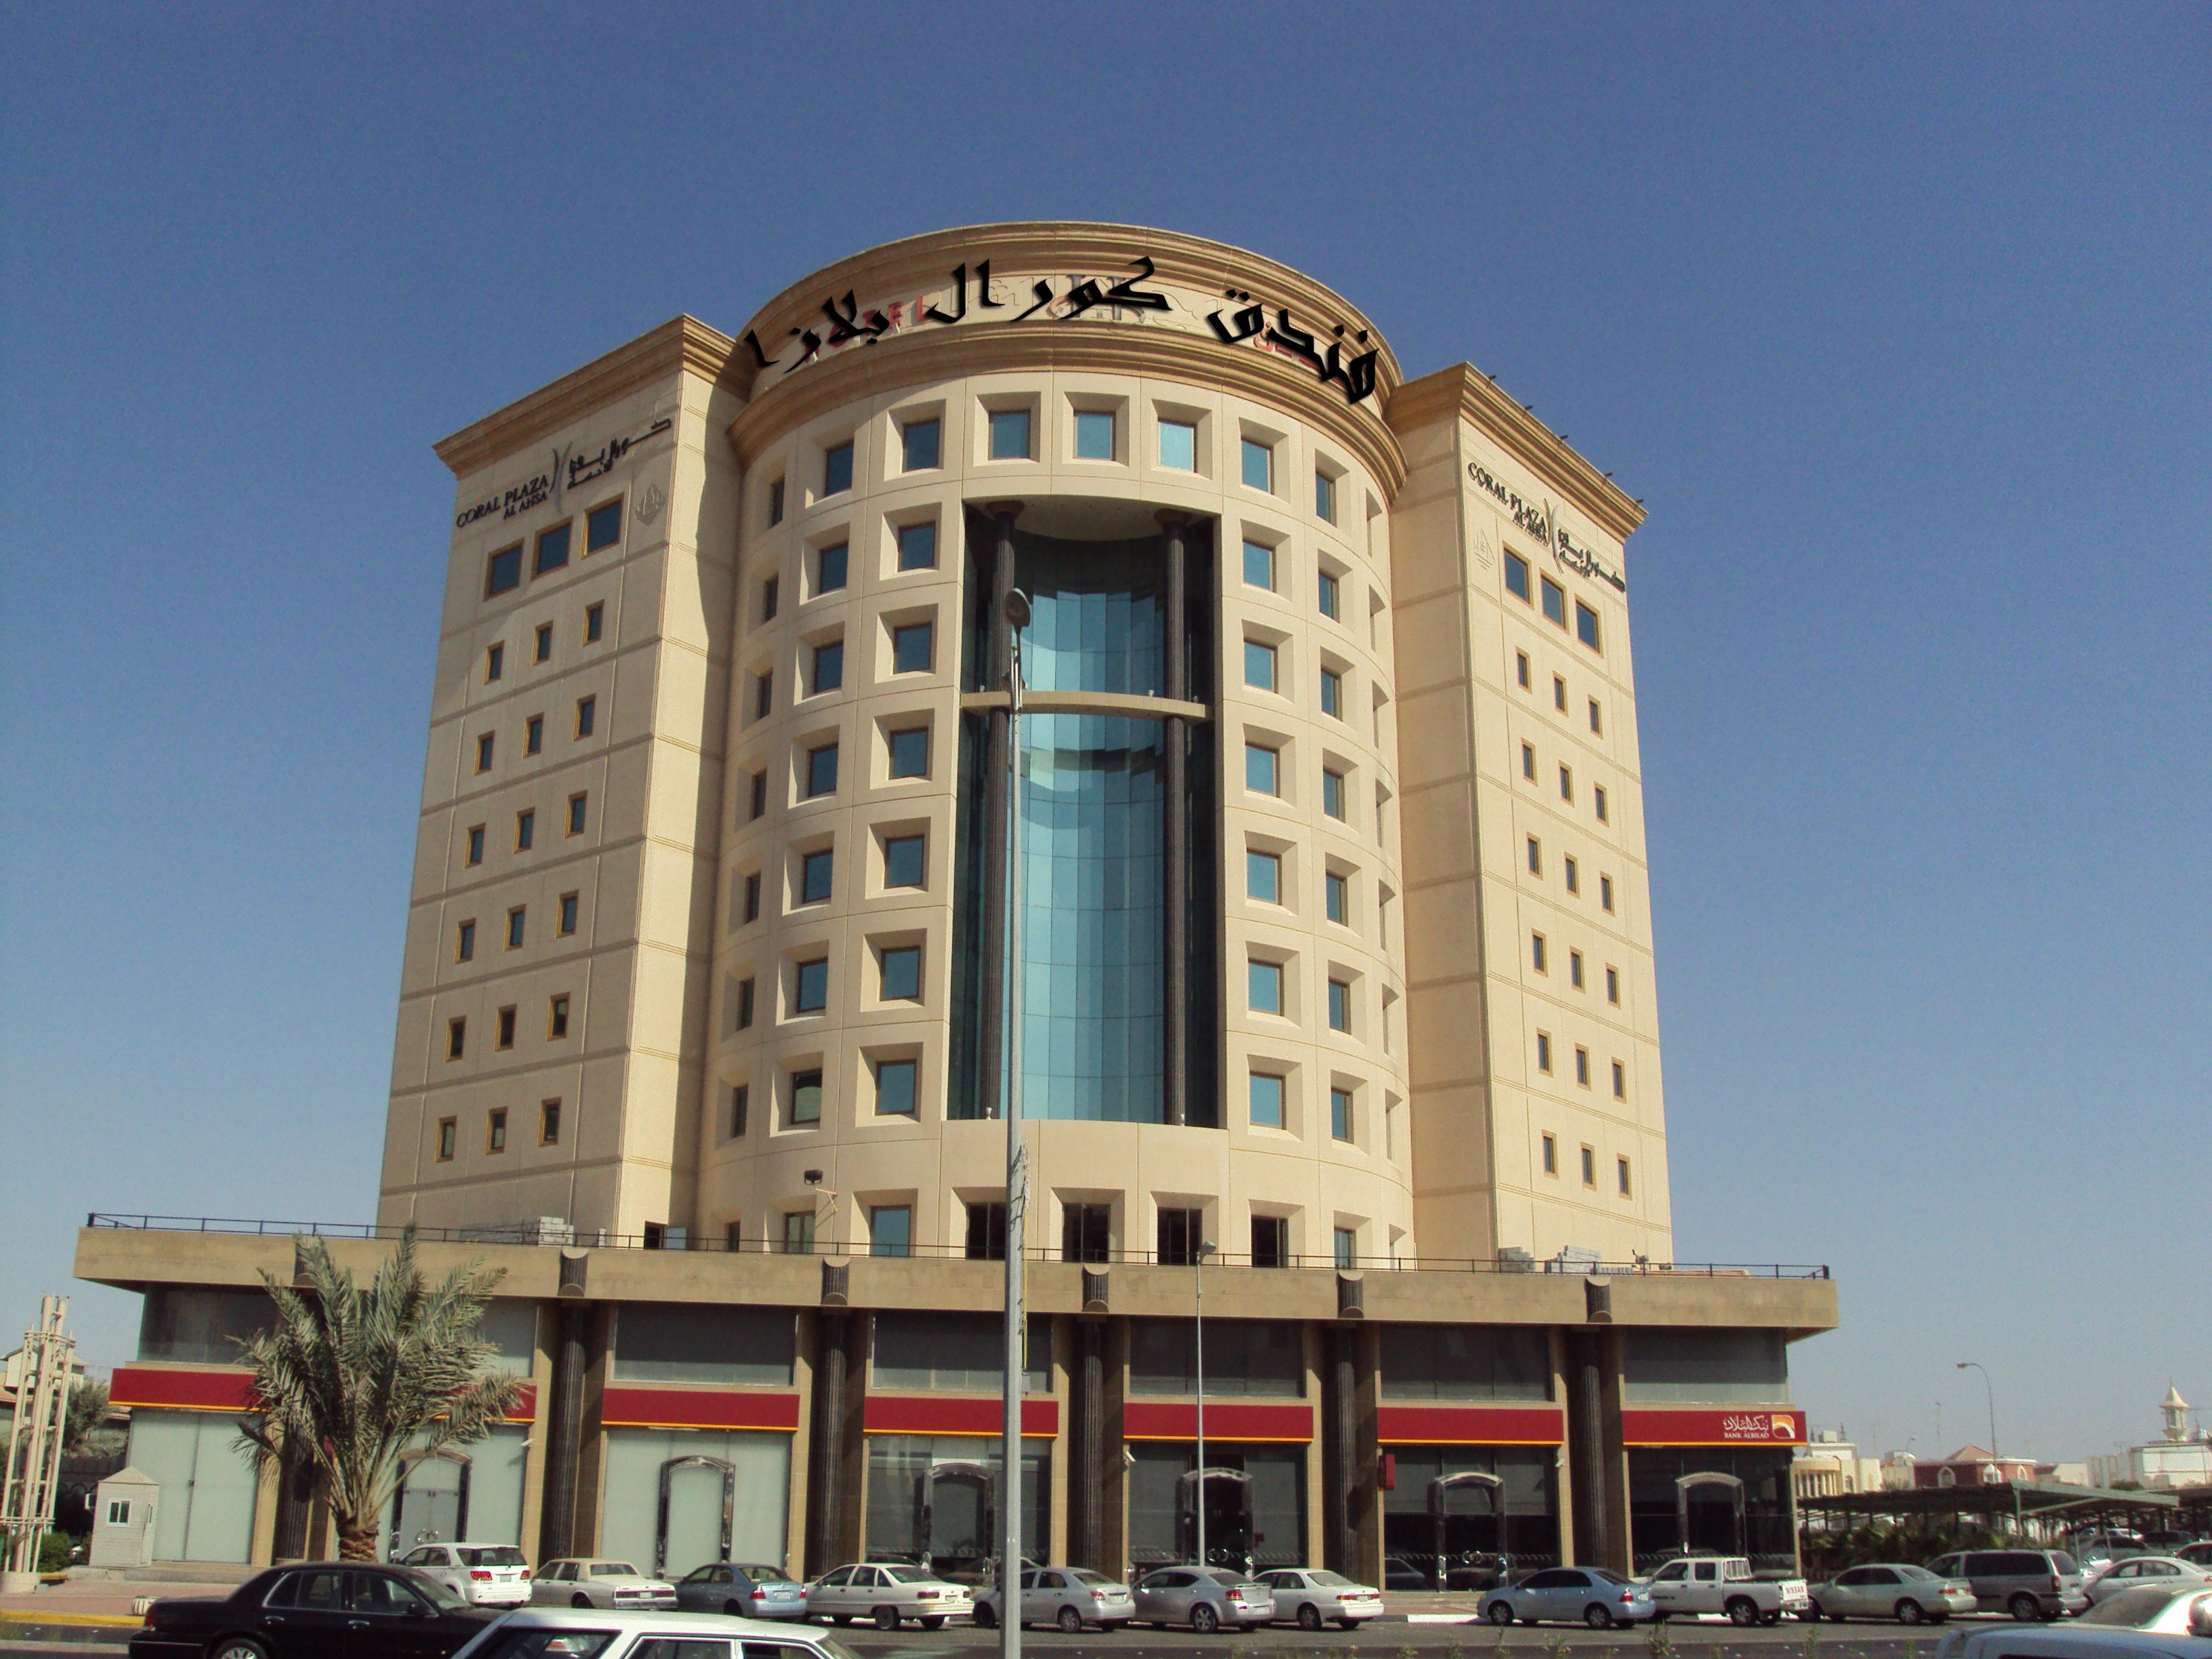 Coral Al Ahsa Hotel Algeria
 FAQ 2016, What facilities are there in Coral Al Ahsa Hotel Algeria
 2016, What Languages Spoken are Supported in Coral Al Ahsa Hotel Algeria
 2016, Which payment cards are accepted in Coral Al Ahsa Hotel Algeria
 , Algeria
 Coral Al Ahsa Hotel room facilities and services Q&A 2016, Algeria
 Coral Al Ahsa Hotel online booking services 2016, Algeria
 Coral Al Ahsa Hotel address 2016, Algeria
 Coral Al Ahsa Hotel telephone number 2016,Algeria
 Coral Al Ahsa Hotel map 2016, Algeria
 Coral Al Ahsa Hotel traffic guide 2016, how to go Algeria
 Coral Al Ahsa Hotel, Algeria
 Coral Al Ahsa Hotel booking online 2016, Algeria
 Coral Al Ahsa Hotel room types 2016.